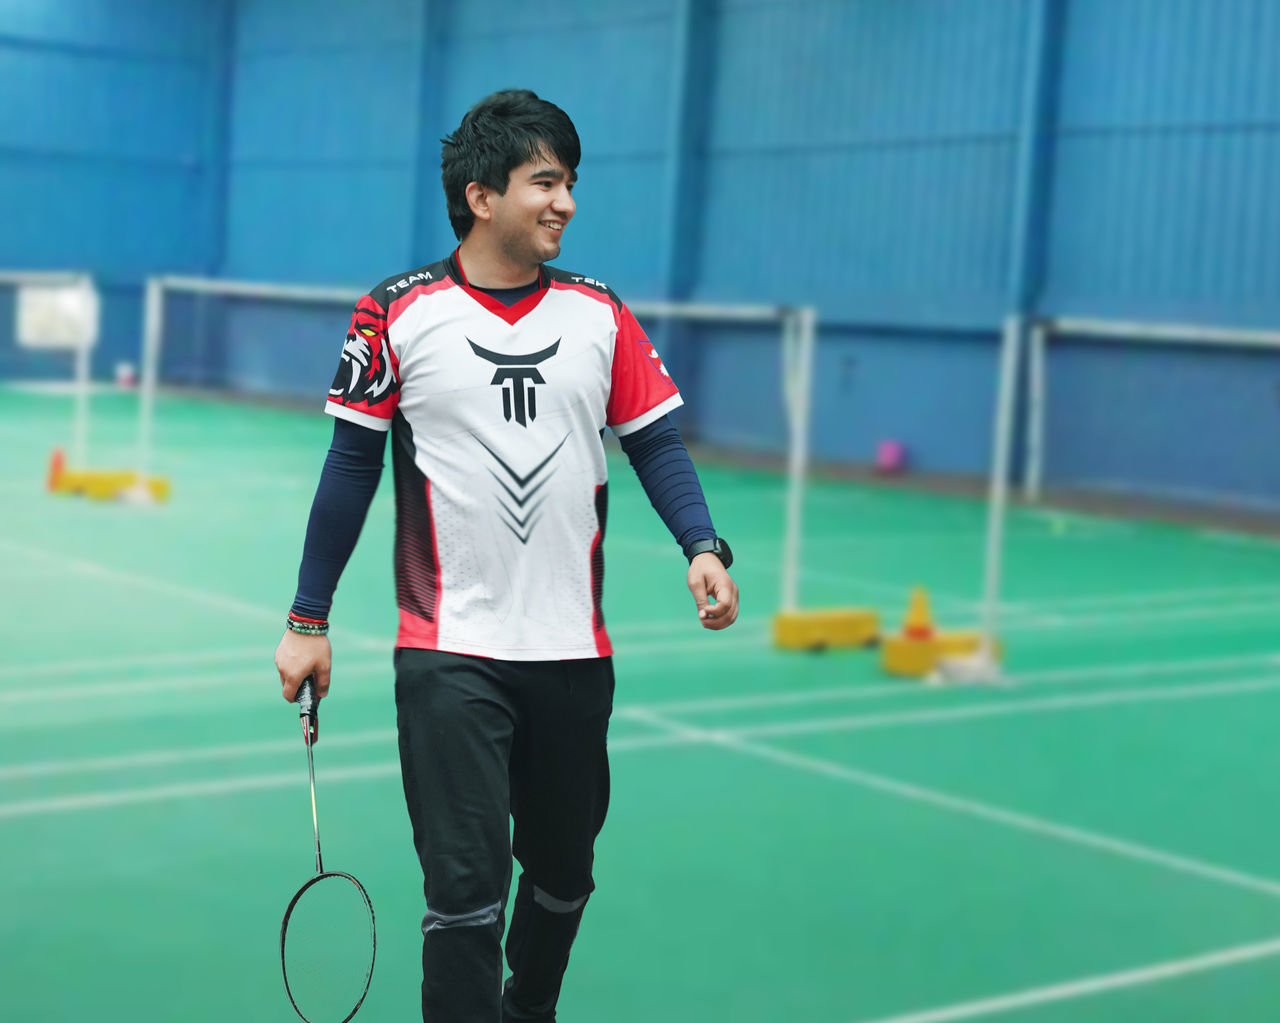 sports, athlete, one person, clothing, player, sports clothing, ball game, lifestyles, exercising, competition, men, young adult, hockey, child, motion, standing, ball, activity, front view, adult, leisure activity, day, soccer, focus on foreground, sports uniform, sports equipment, childhood, person, full length, outdoors, tennis